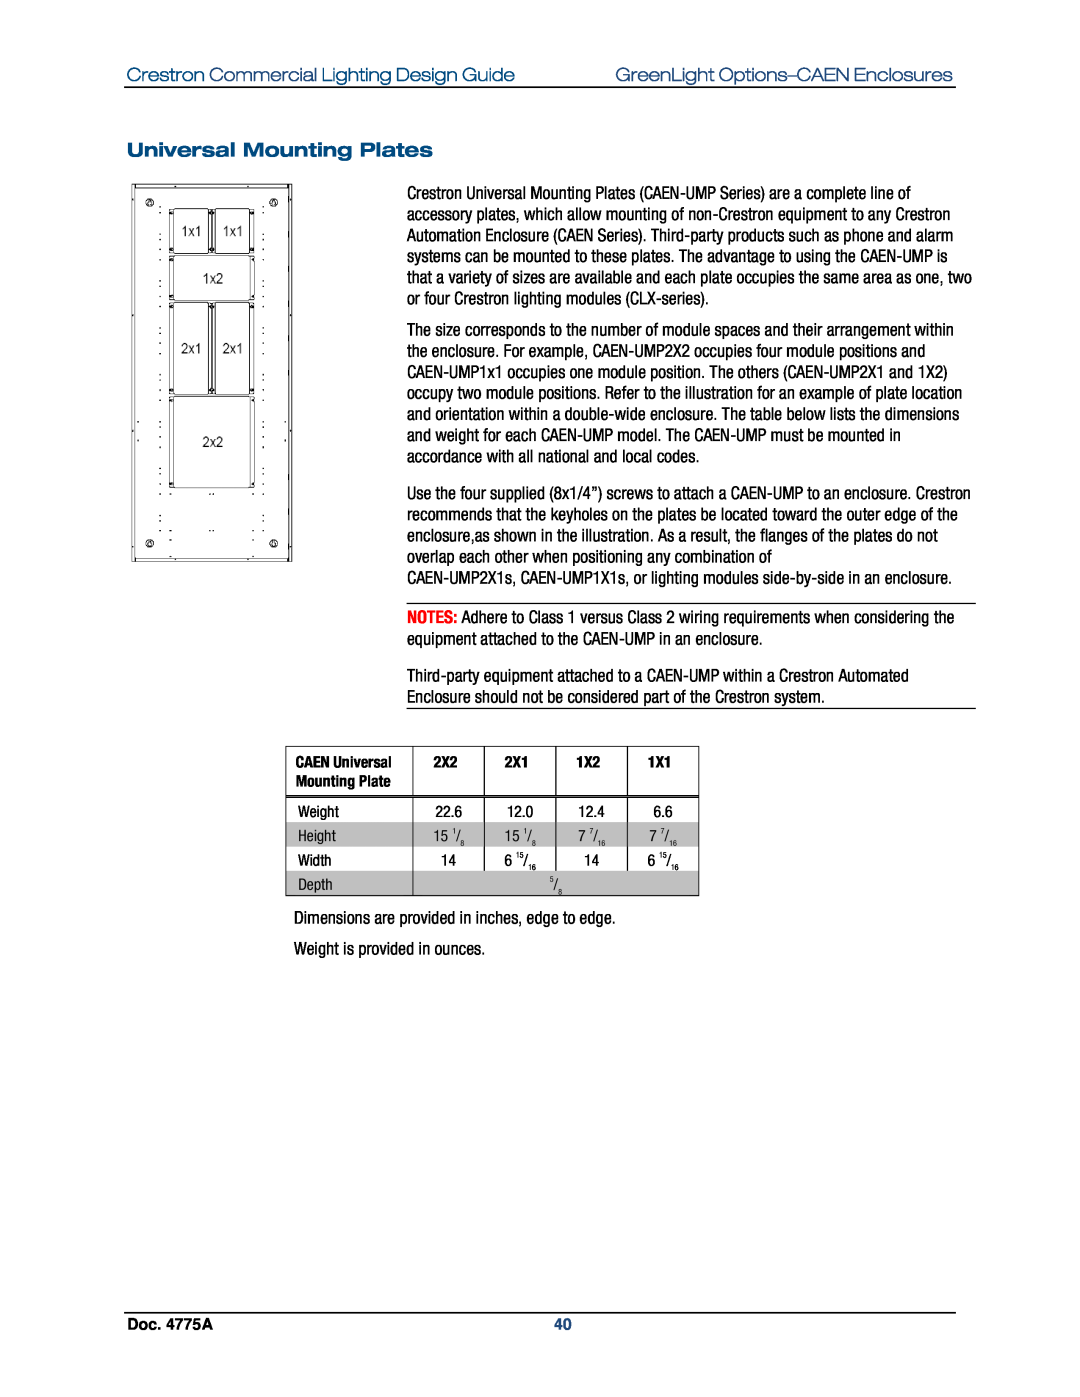 Crestron electronic GLPS-SW-FT, IPAC-GL1, GLPS-HSW Universal Mounting Plates, Crestron Commercial Lighting Design Guide 